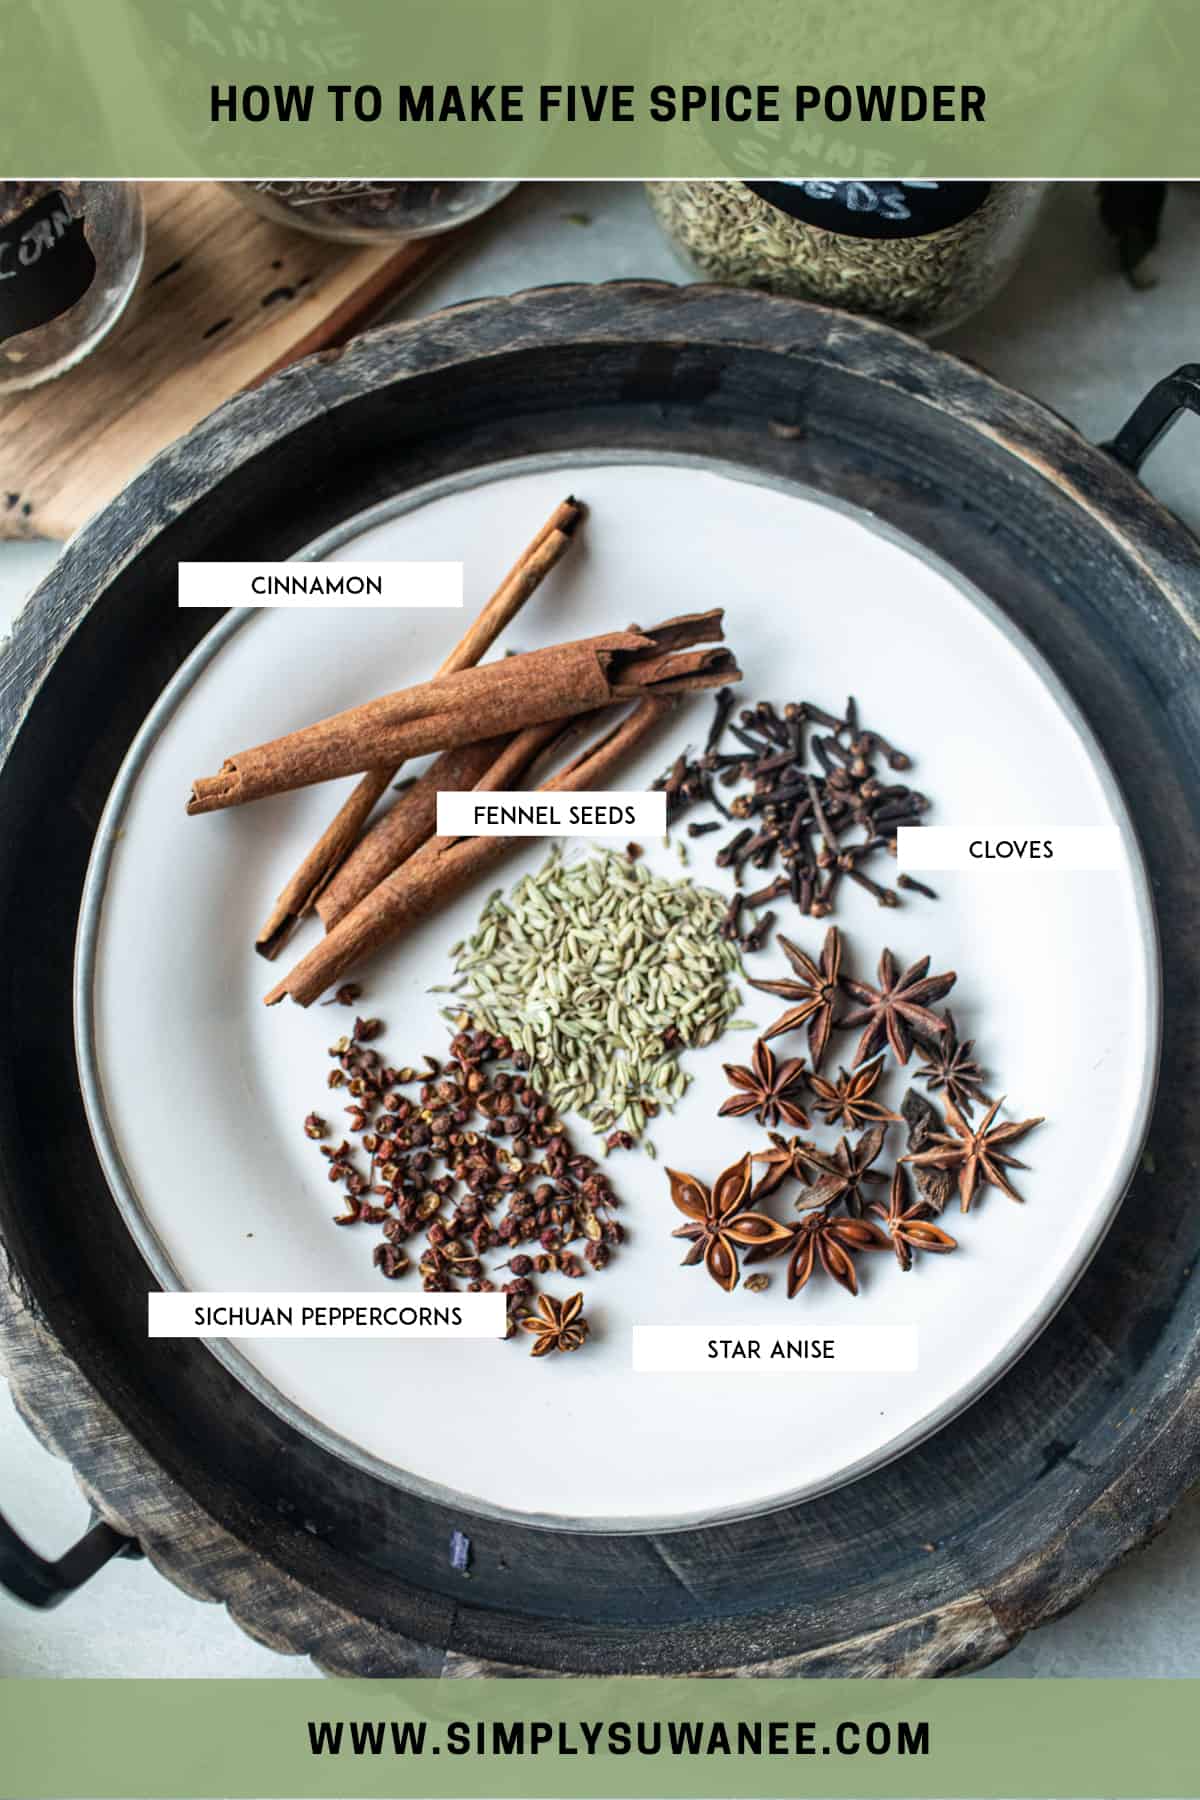 five spice powder ingredients on a plate.